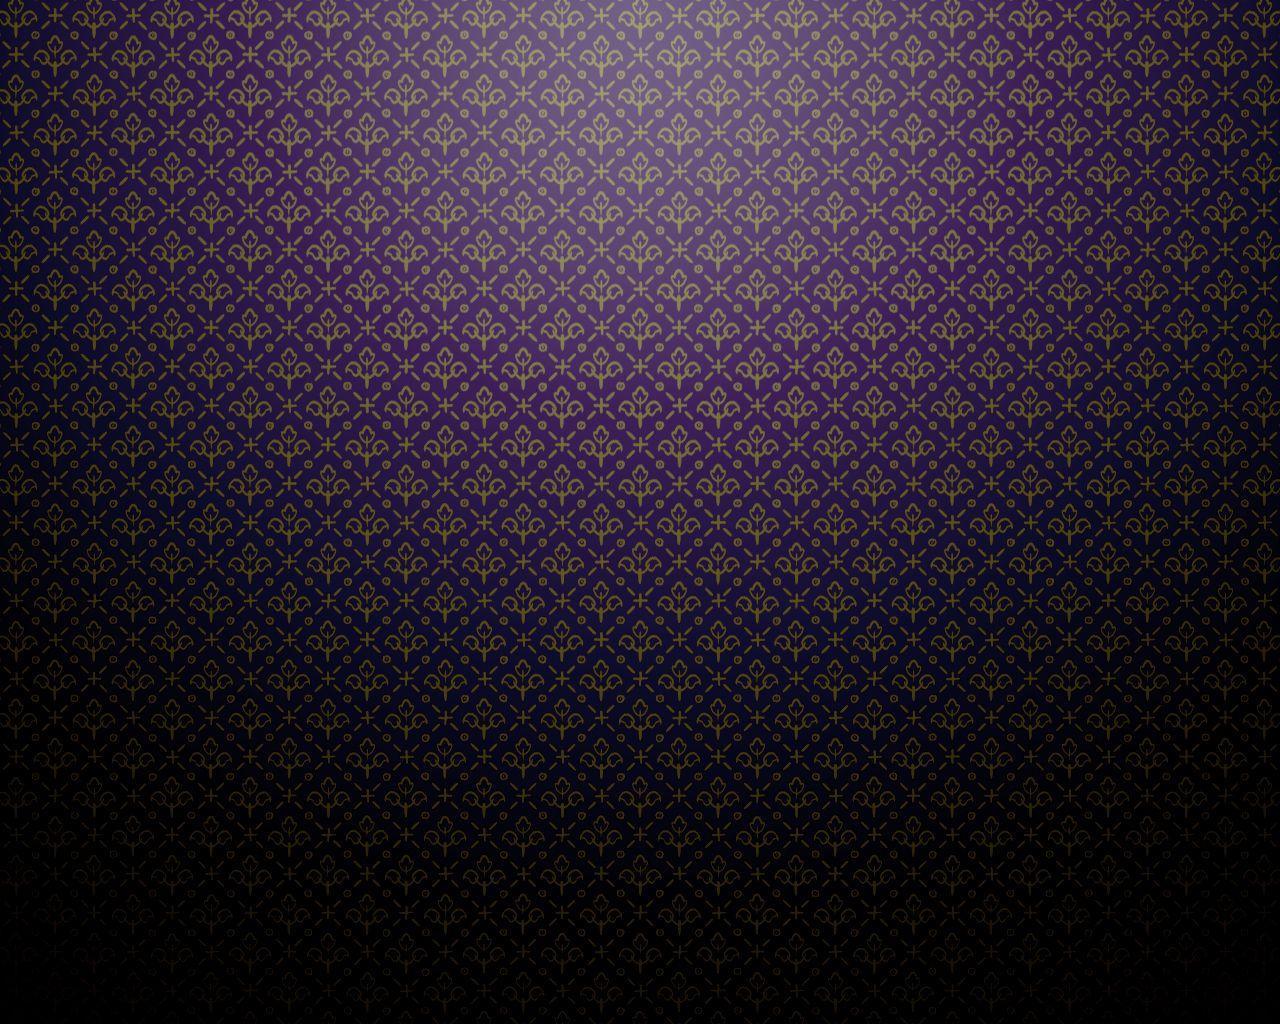 Purple and Gold wallpaperx1024